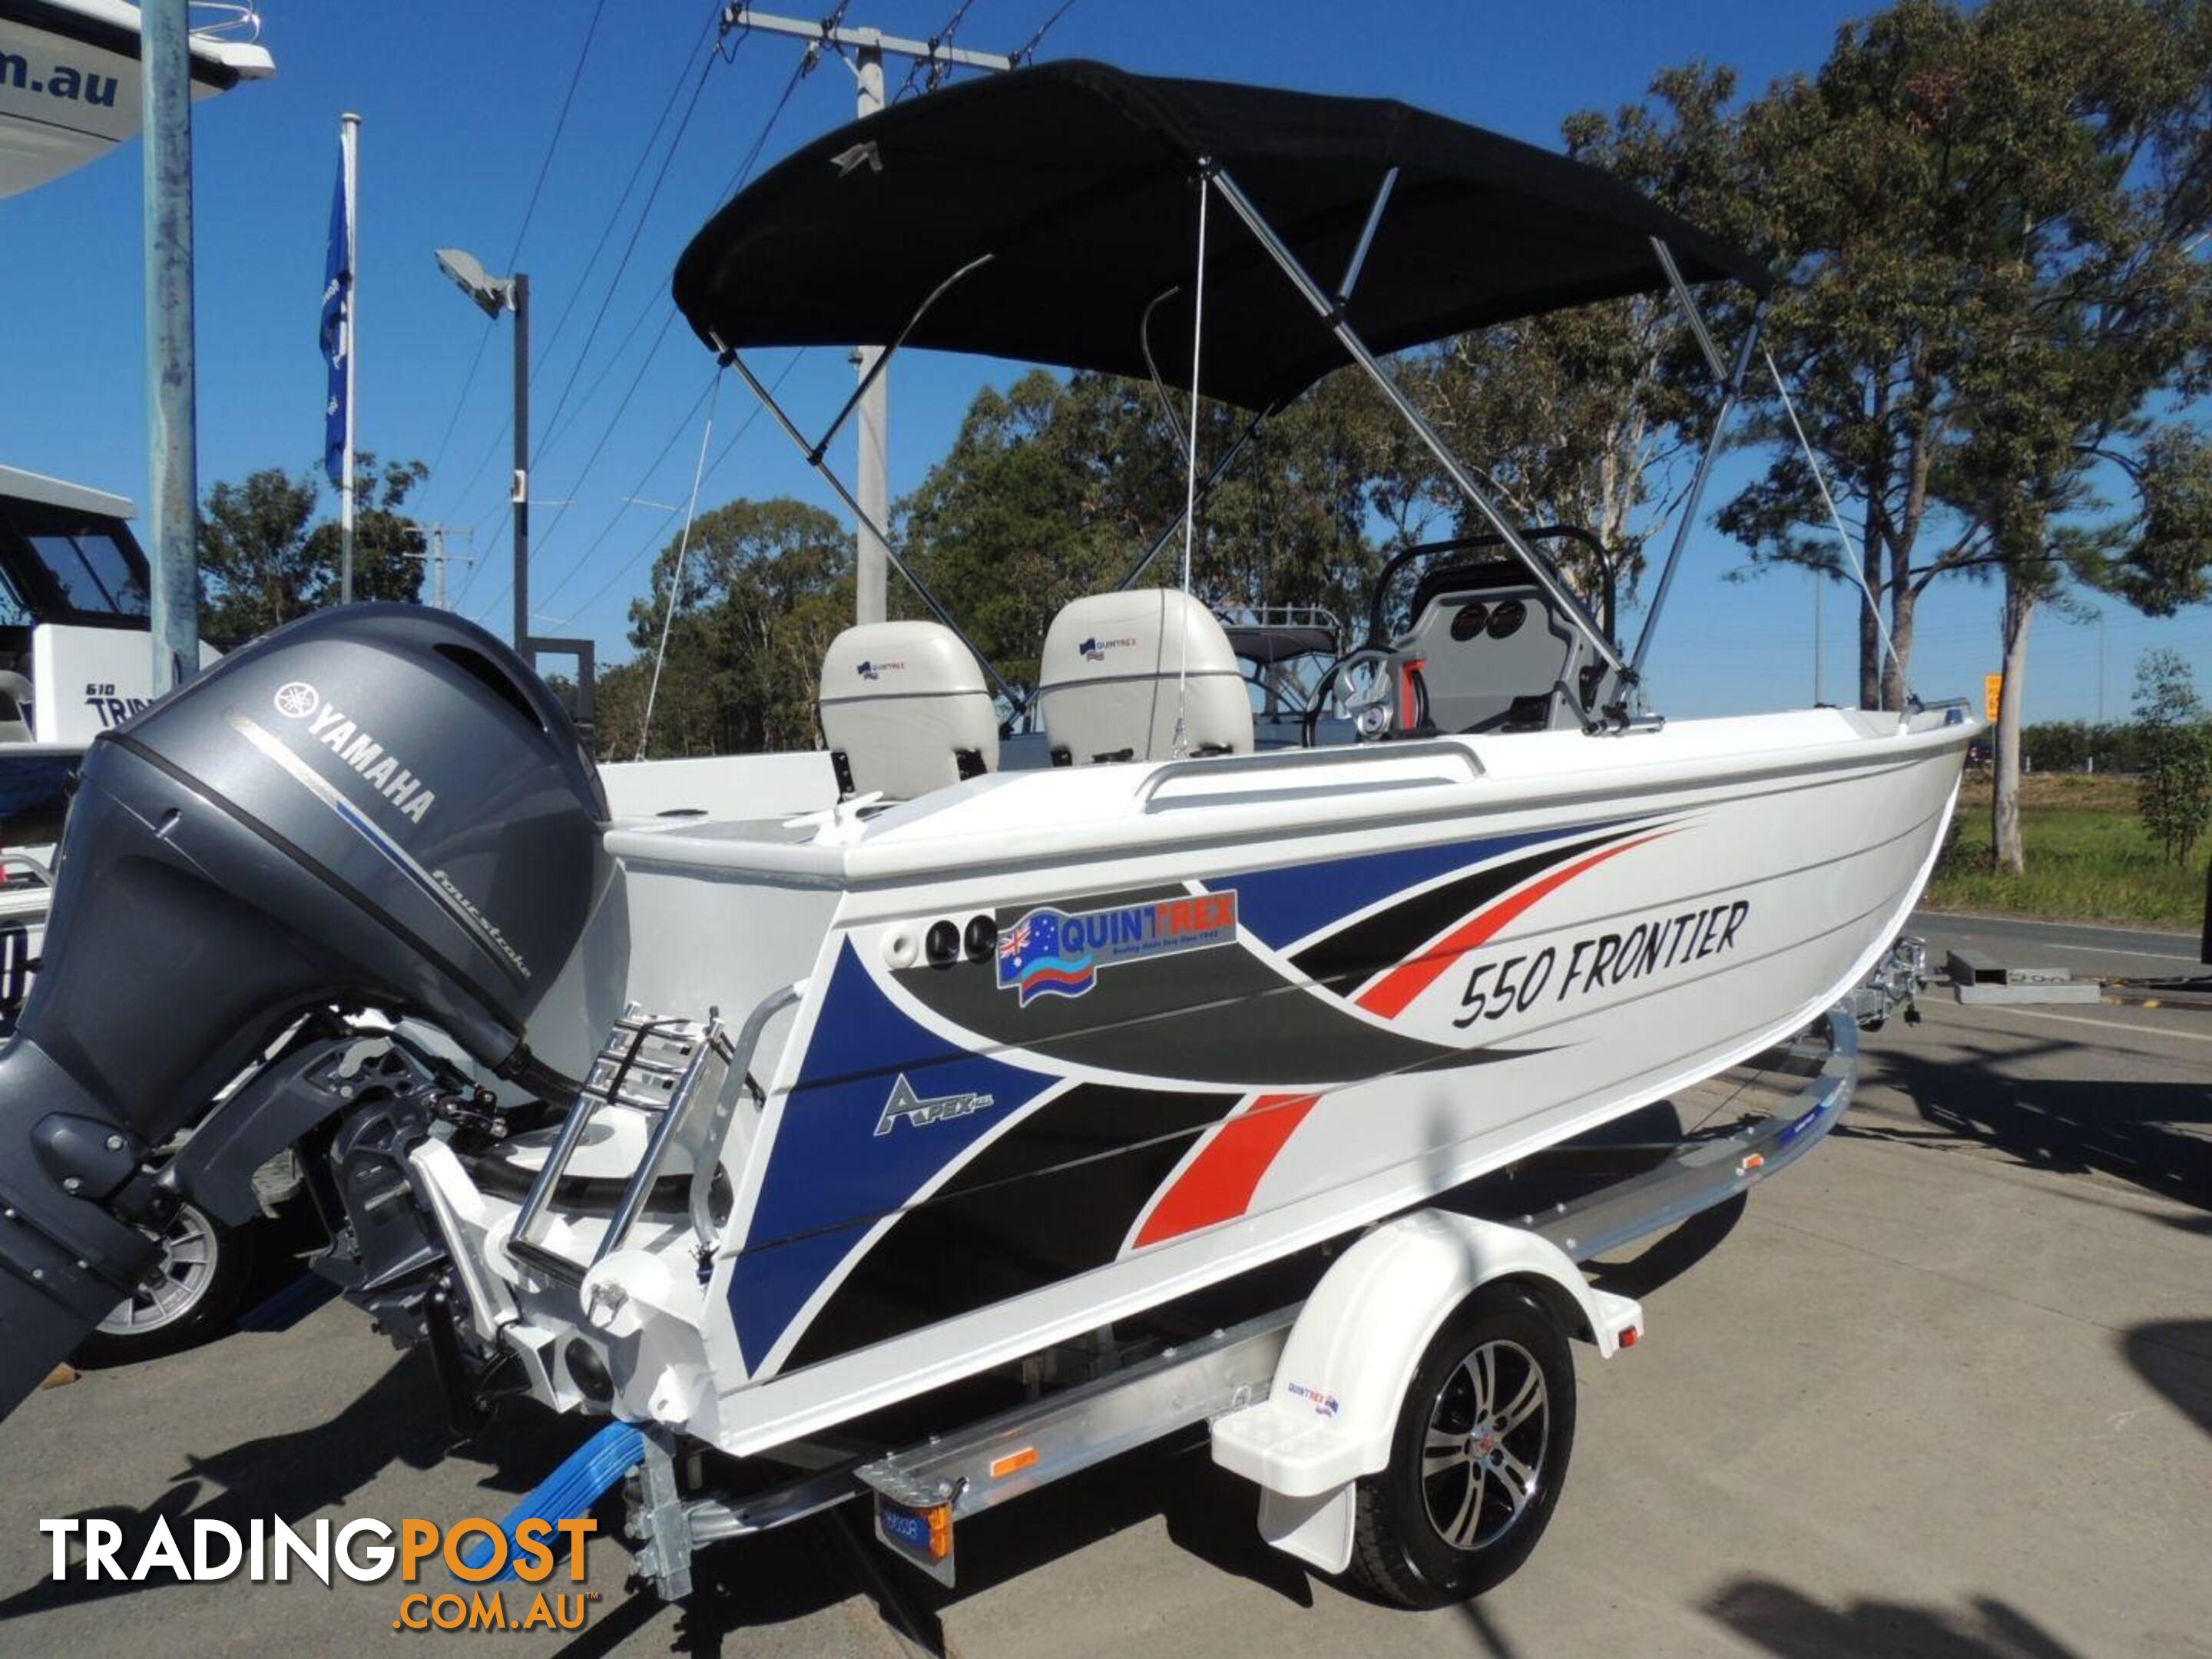 Quintrex 550 Frontier + Yamaha F115hp 4-Stroke - Pack 2 for sale online prices